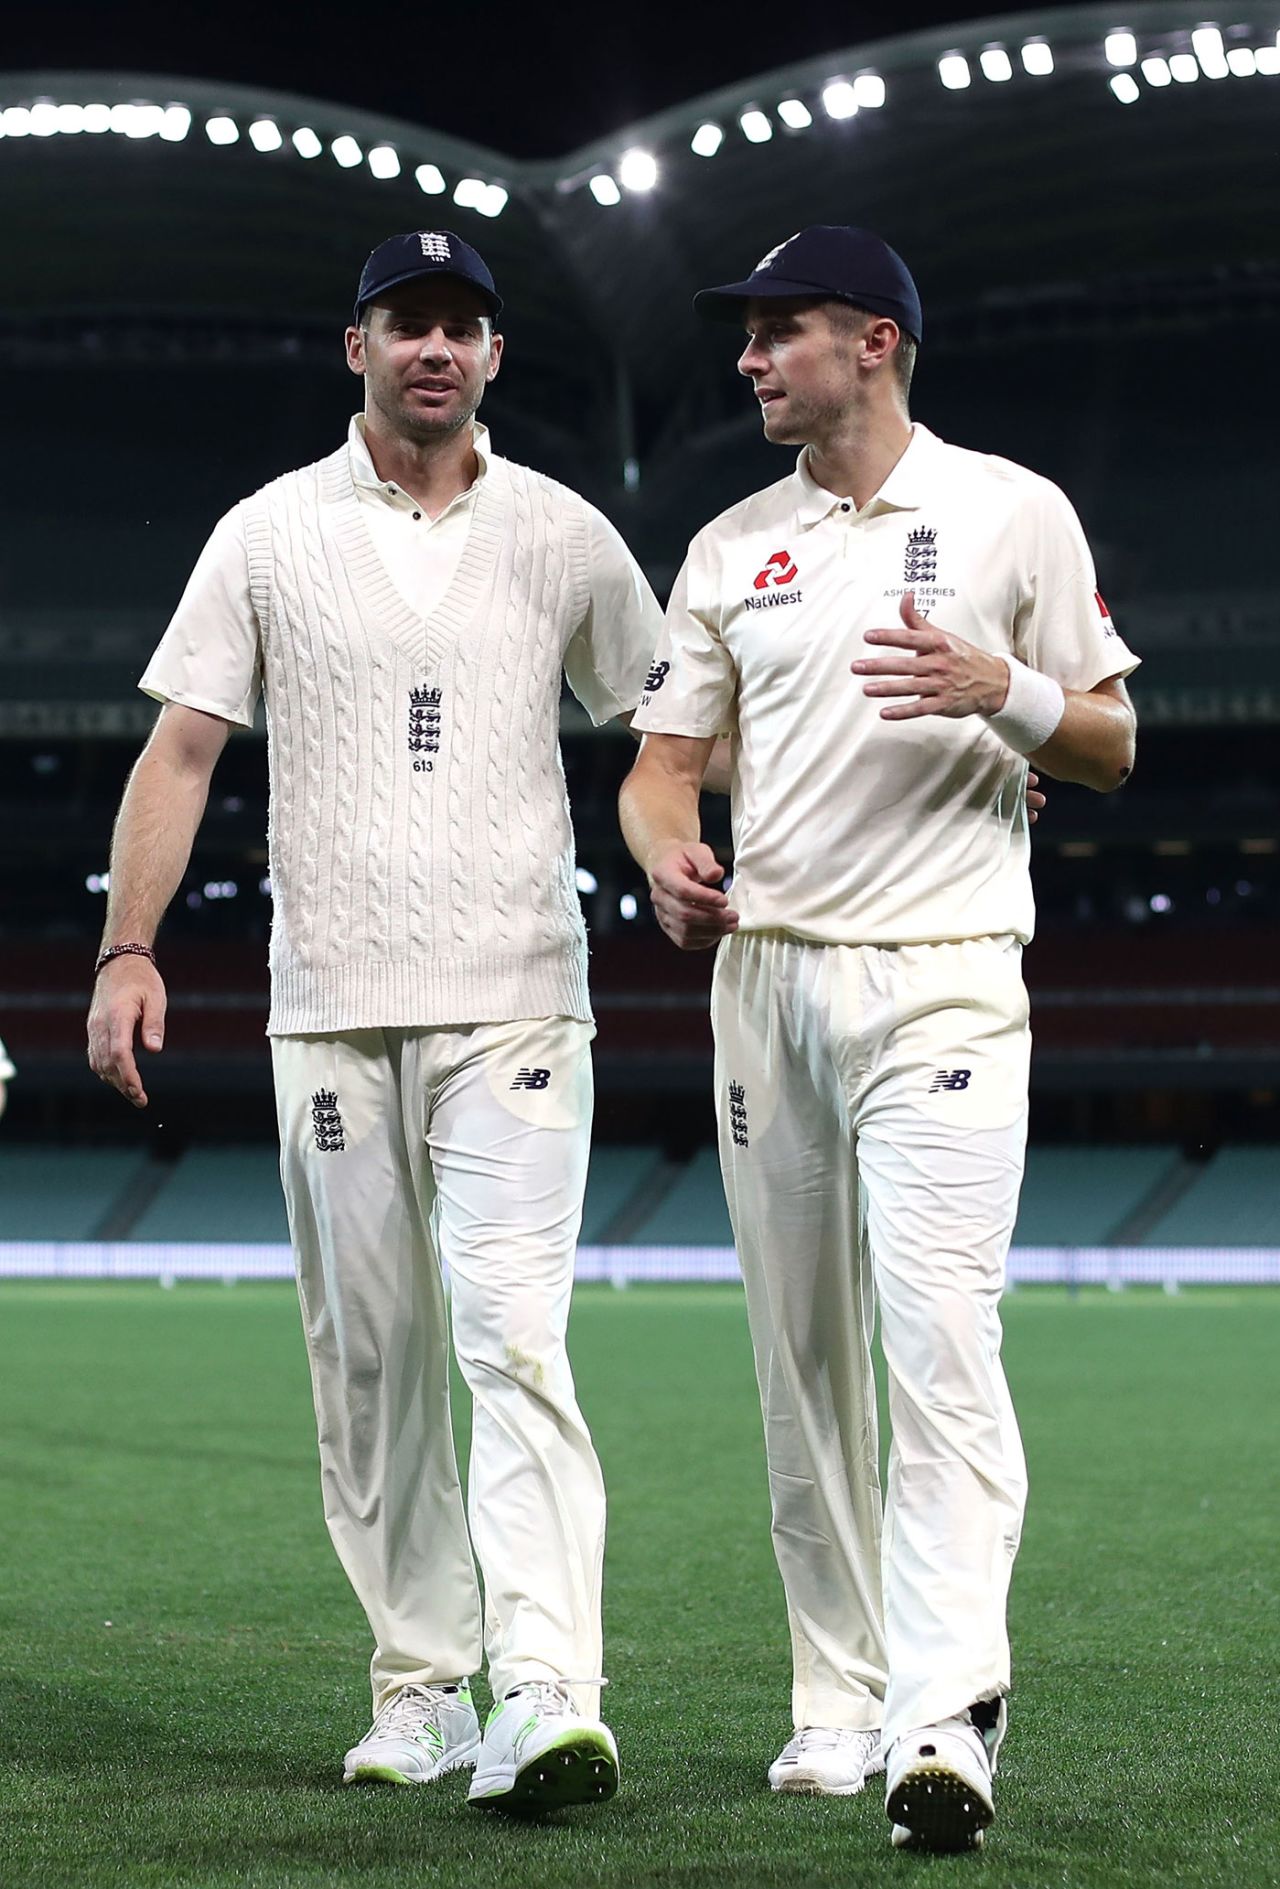 James Anderson and Chris Woakes head off after England fought back with the pink ball, Cricket Australia XI v England, The Ashes 2017-18, tour match, 3rd day, Adelaide, November 10, 2017